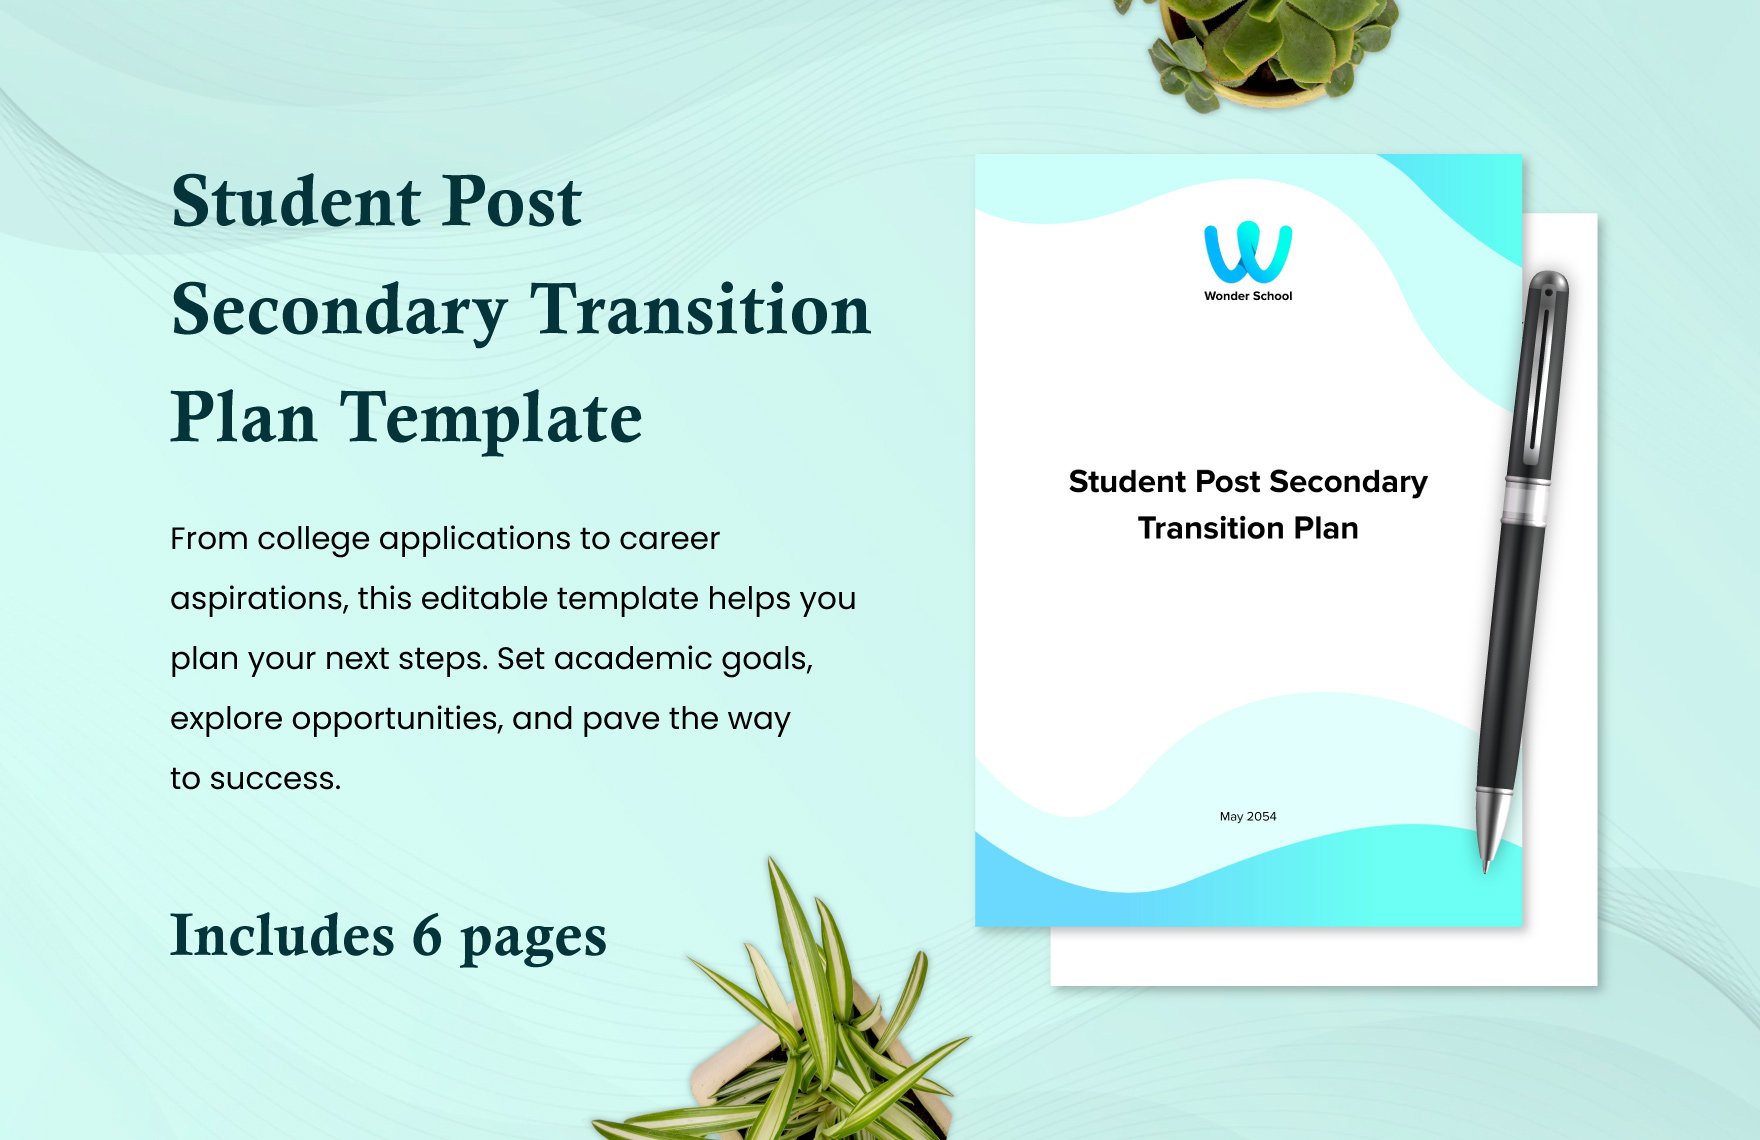 Student Post Secondary Transition Plan Template